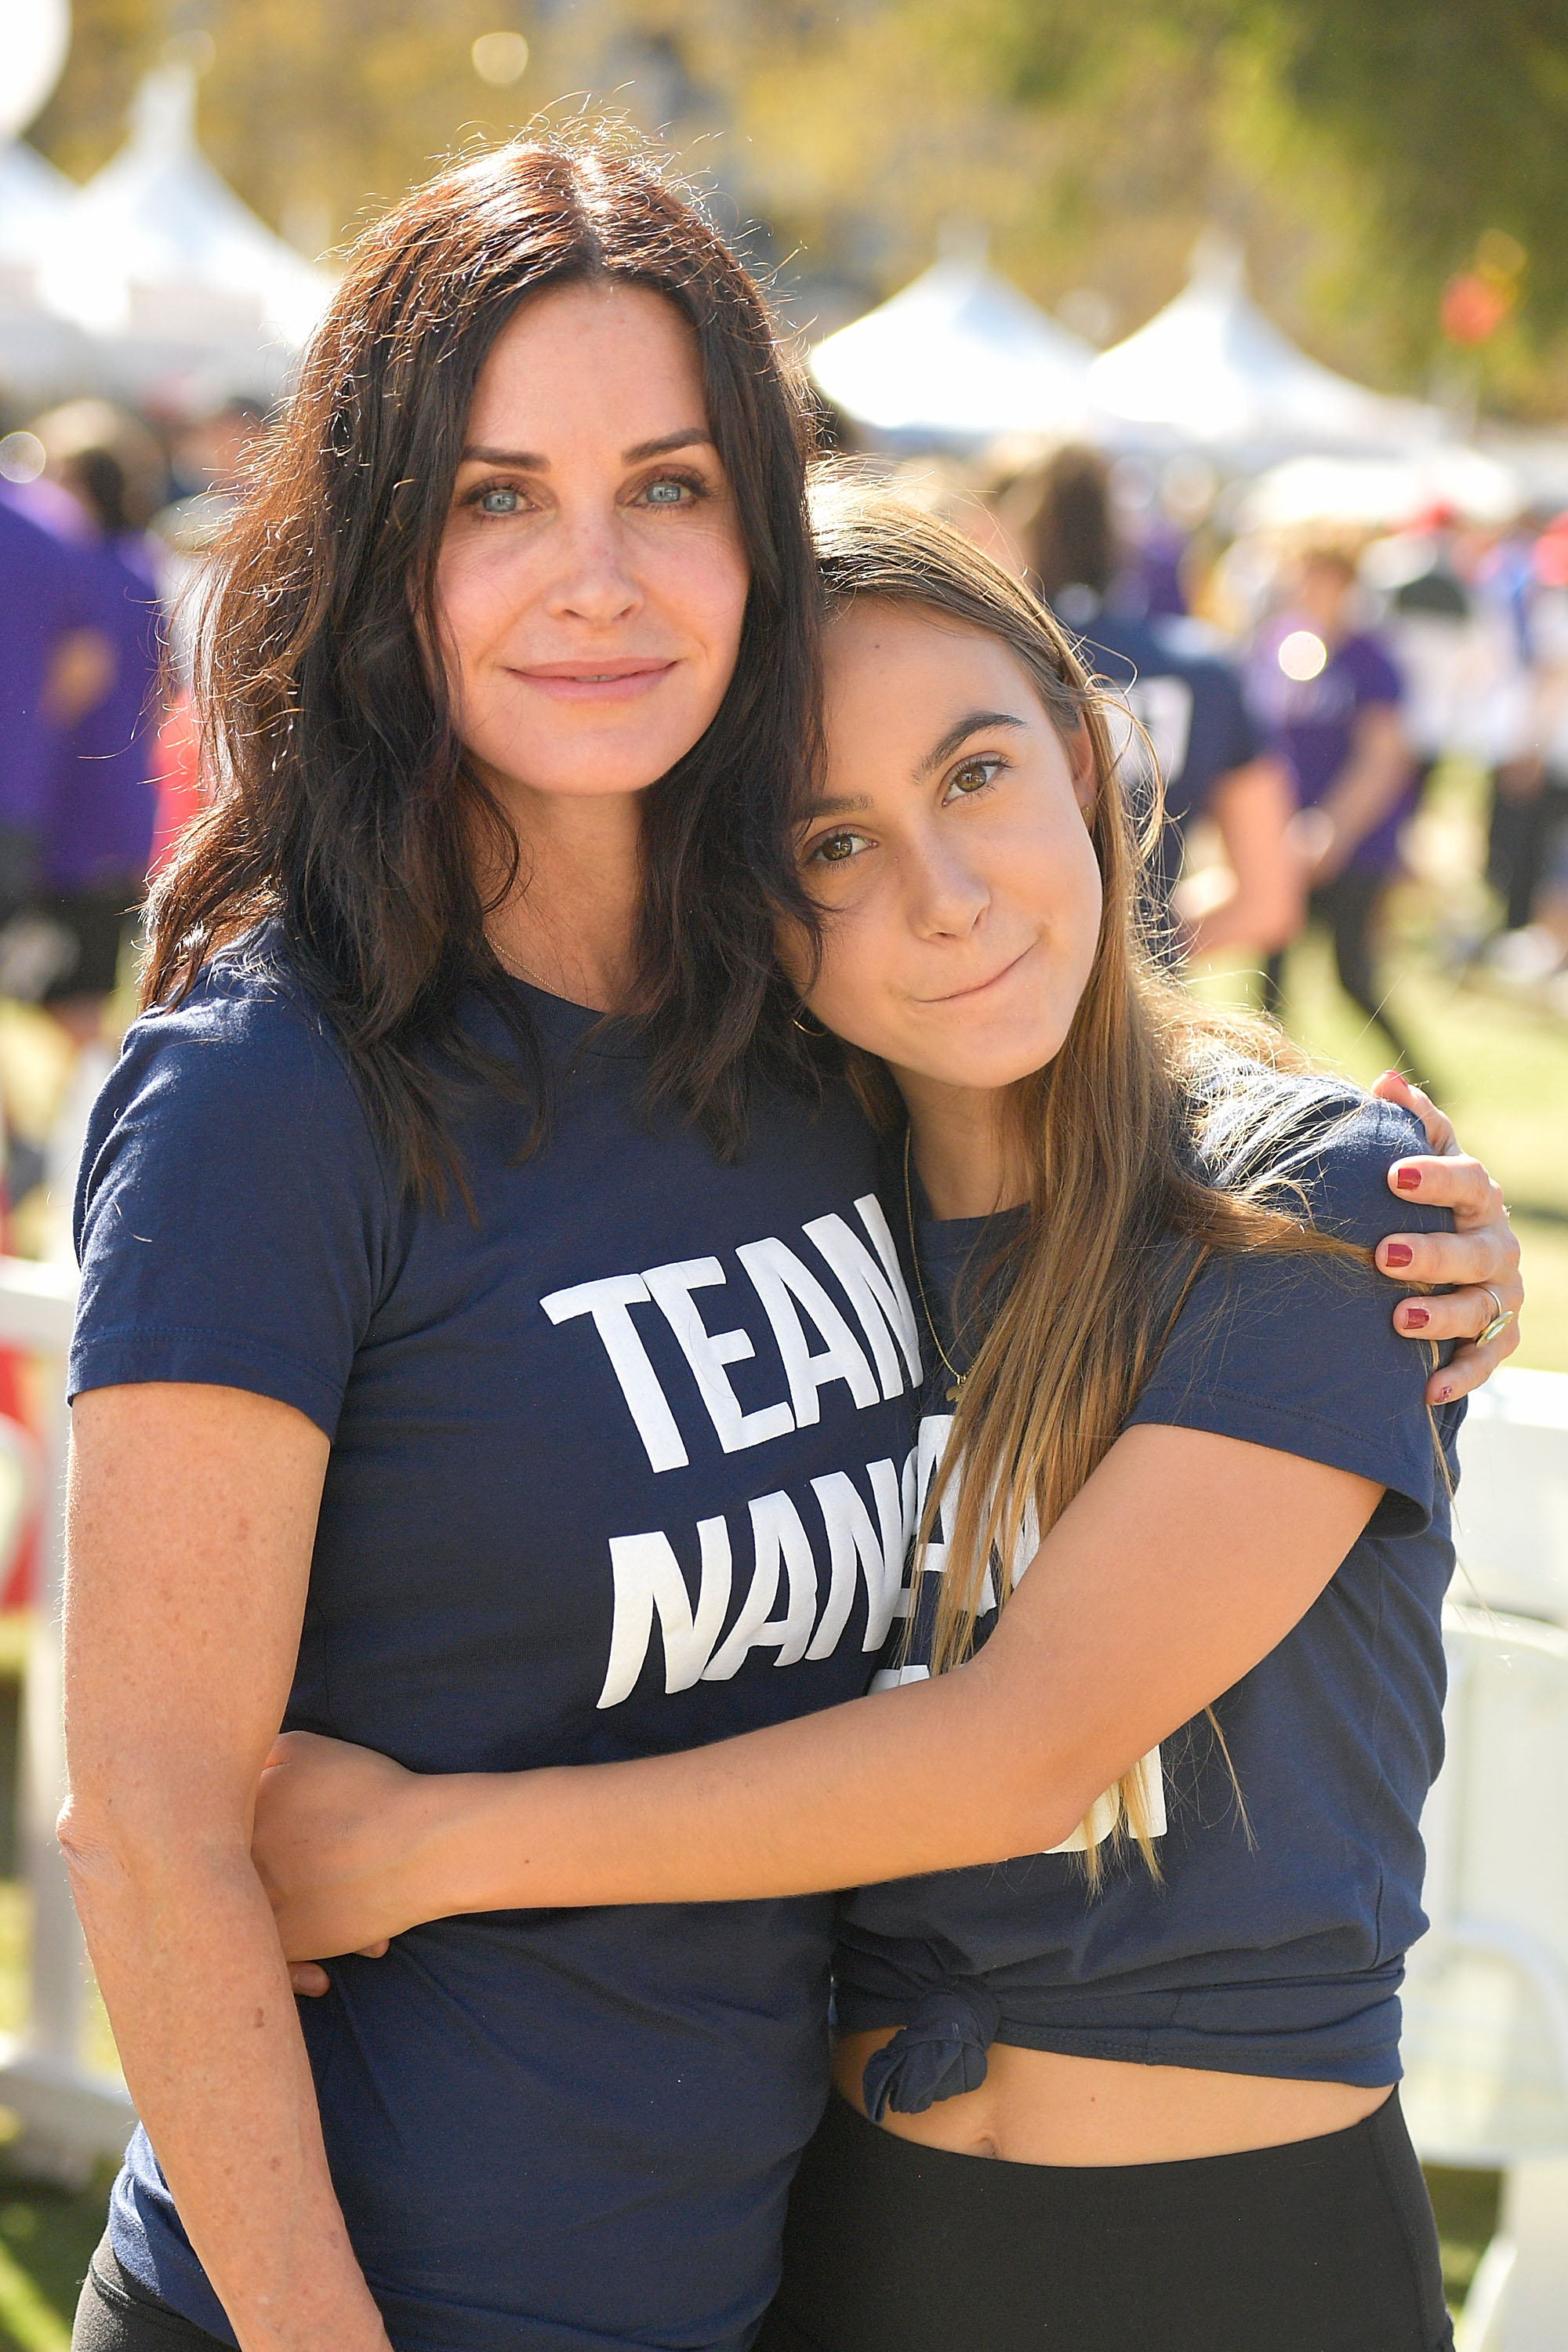 Courteney Cox and her daughter during the 15th Annual LA County Walk to Defeat ALS on October 15, 2017, in Los Angeles, California. | Source: Getty Images